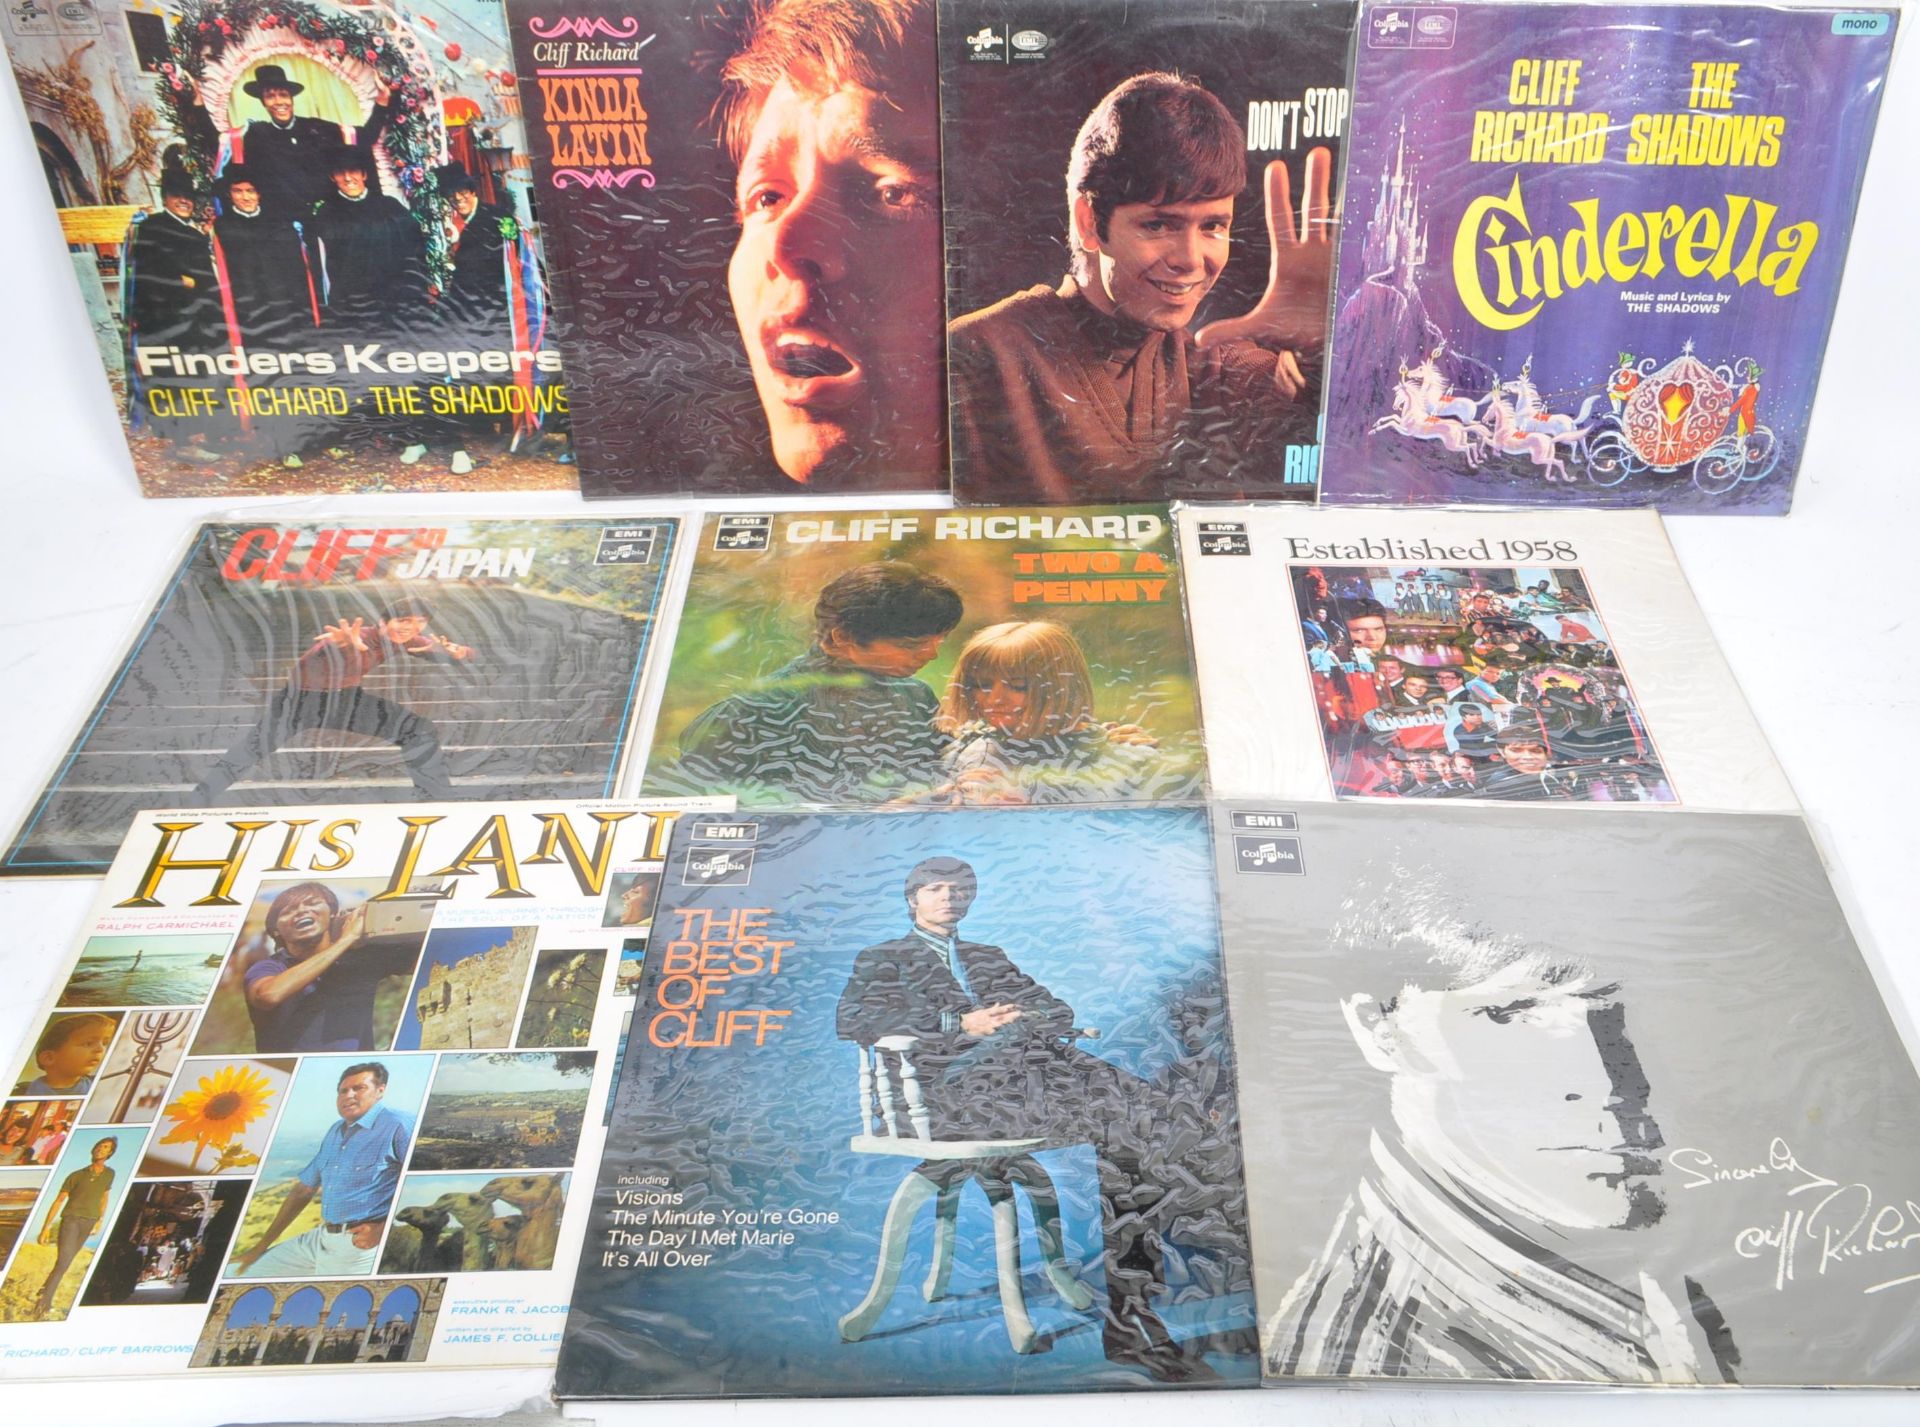 SIR CLIFF RICHARD OBE - COLLECTION OF LONG PLAY VINYL RECORDS - Image 5 of 6